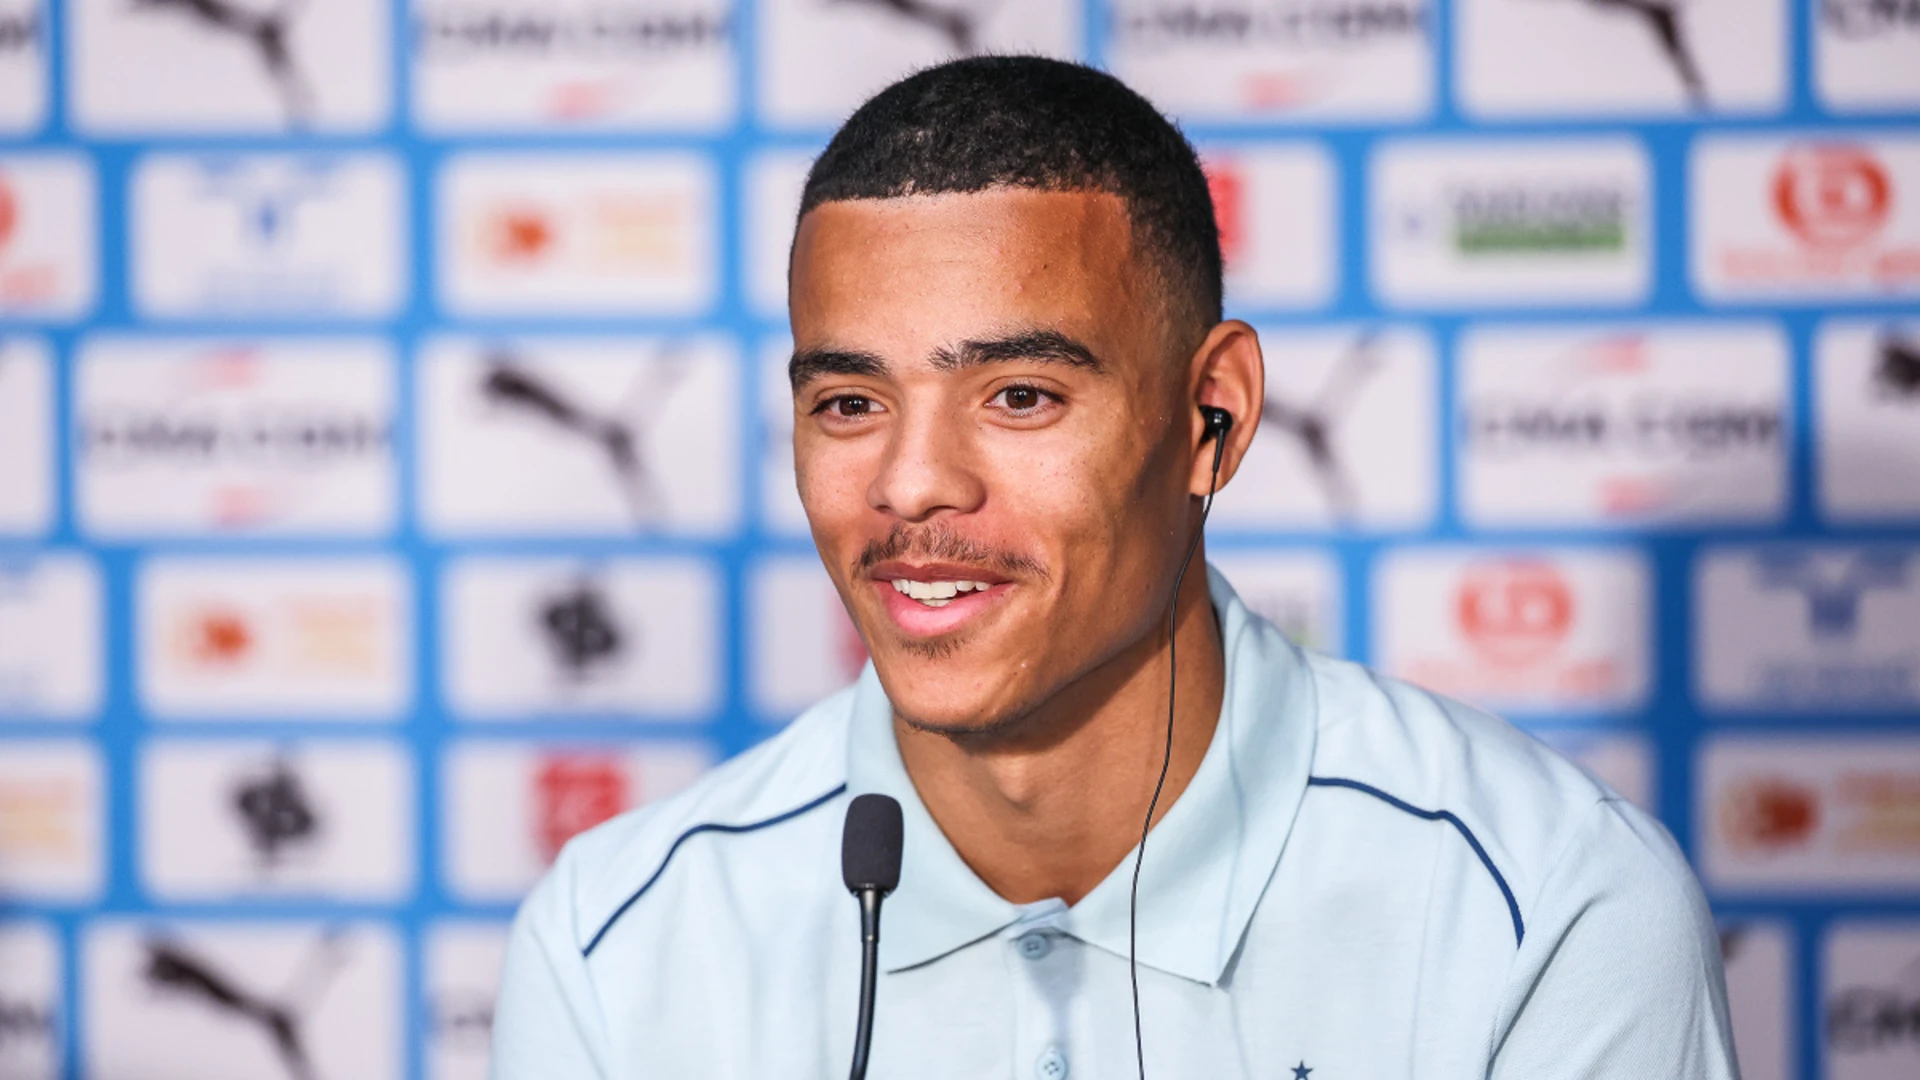 Marseille's new striker Greenwood deflects questions about controversial past